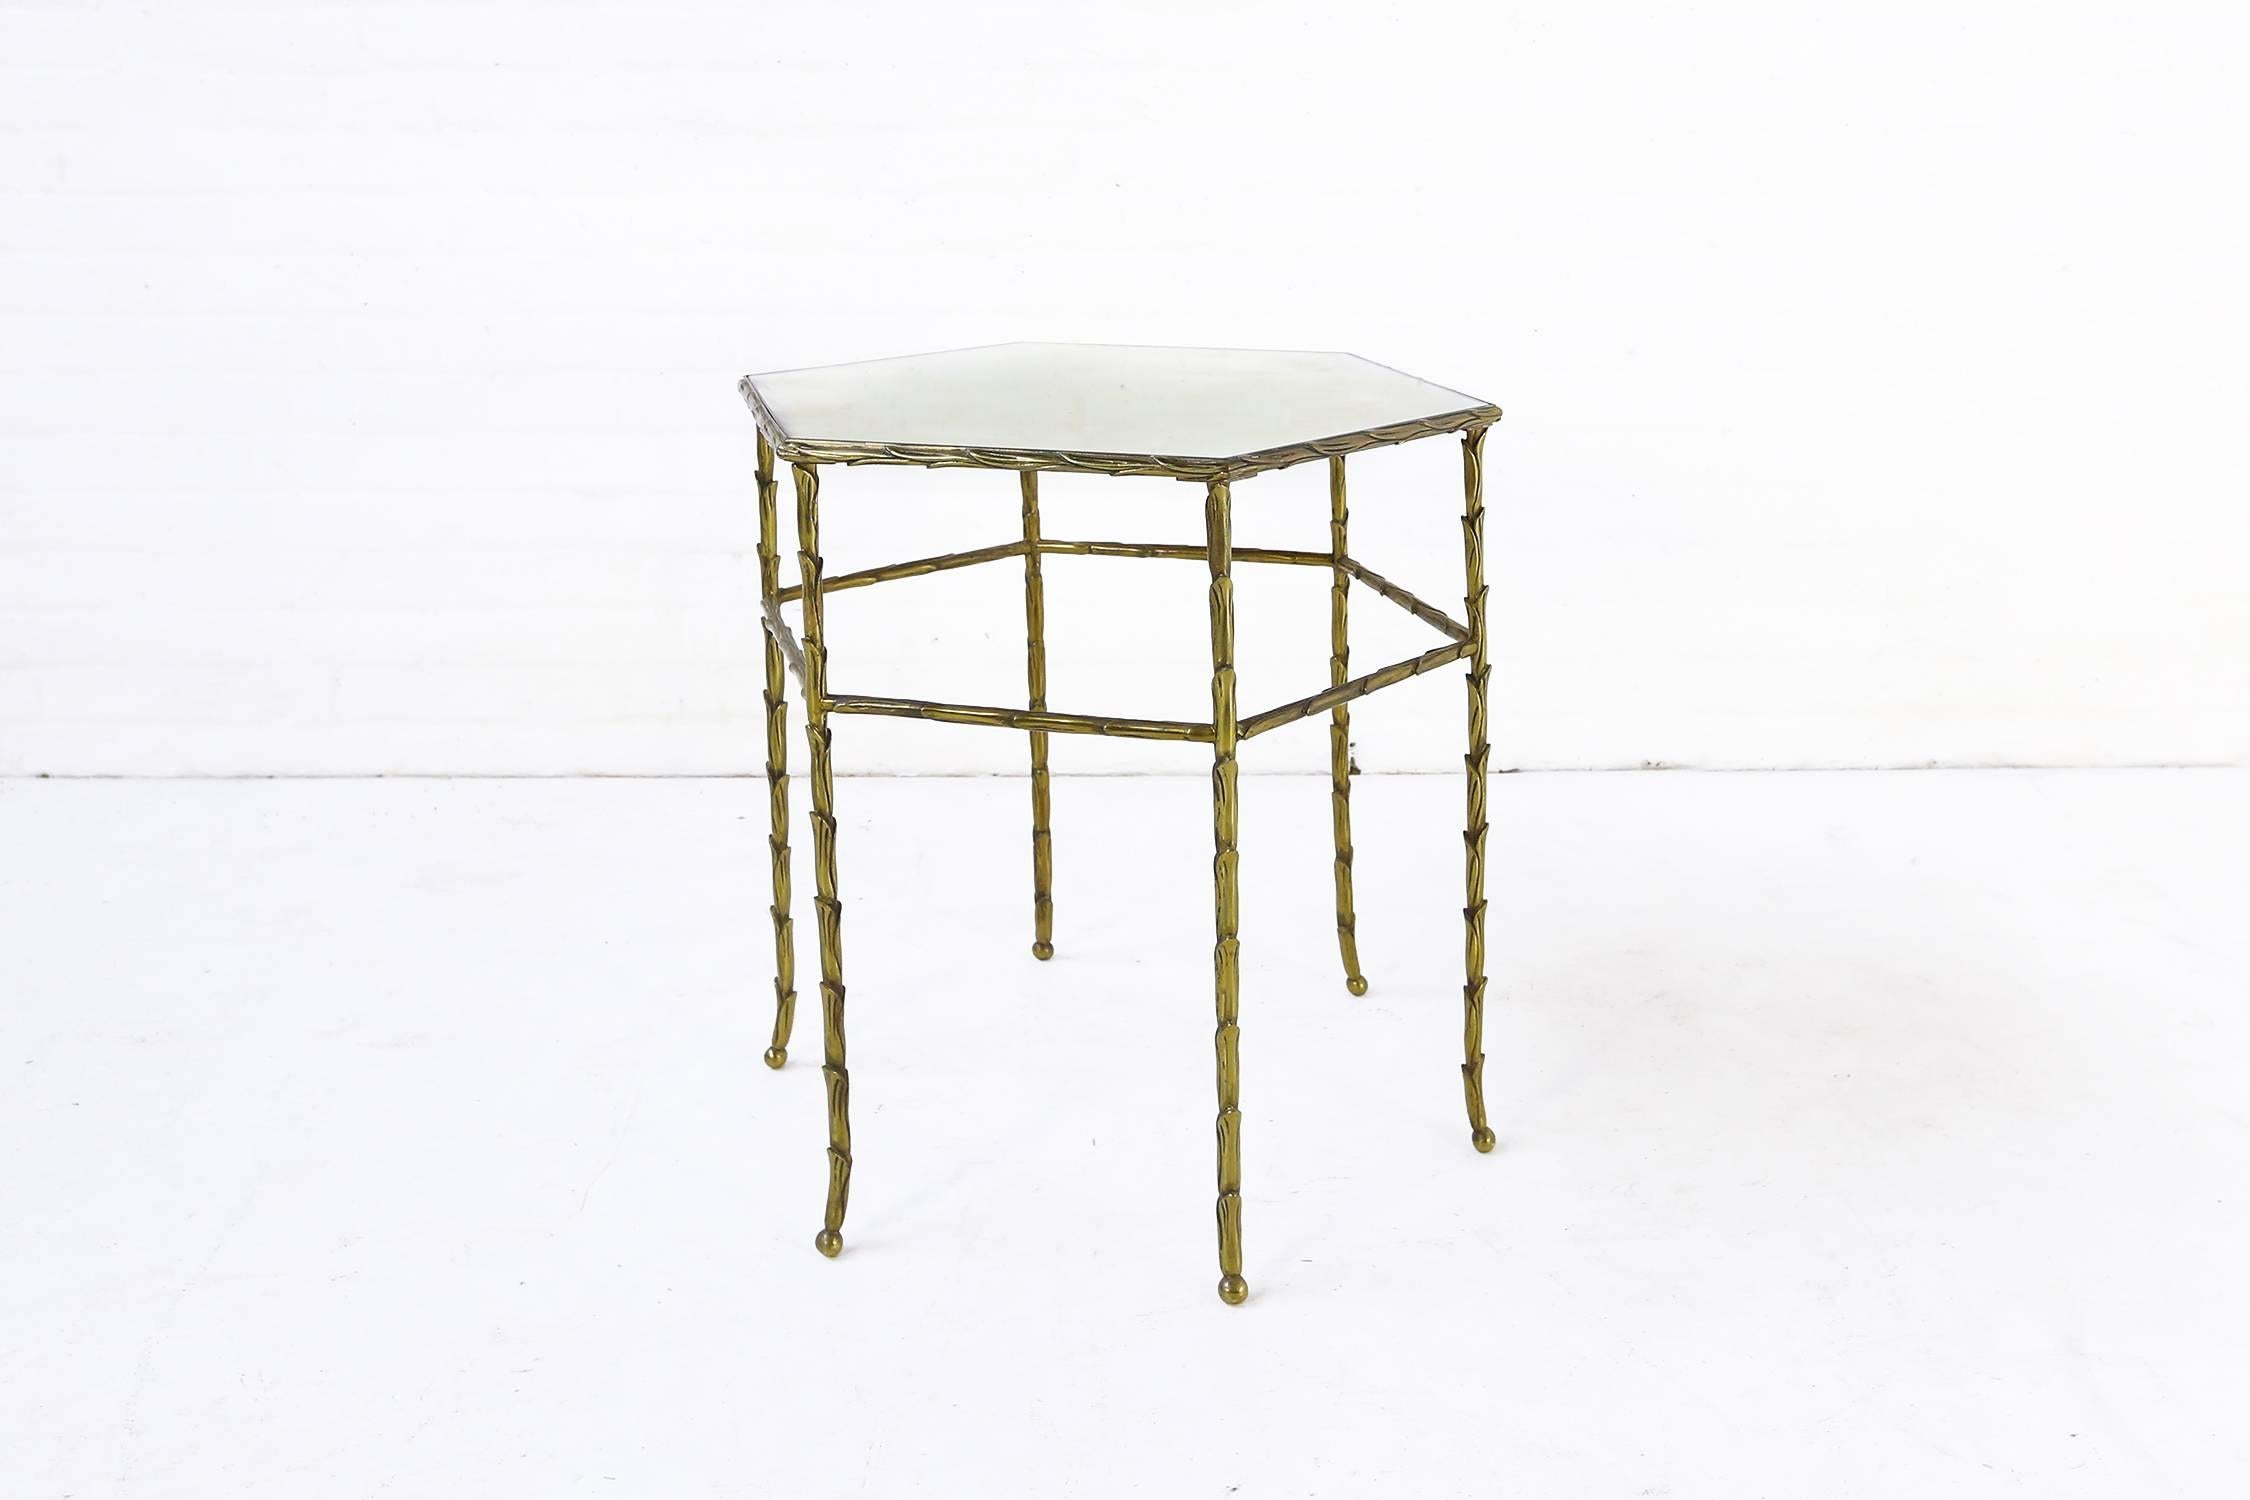 Mid-20th Century French Faux Bamboo Brass Hexagonal Table from Maison Bagues, 1950s For Sale